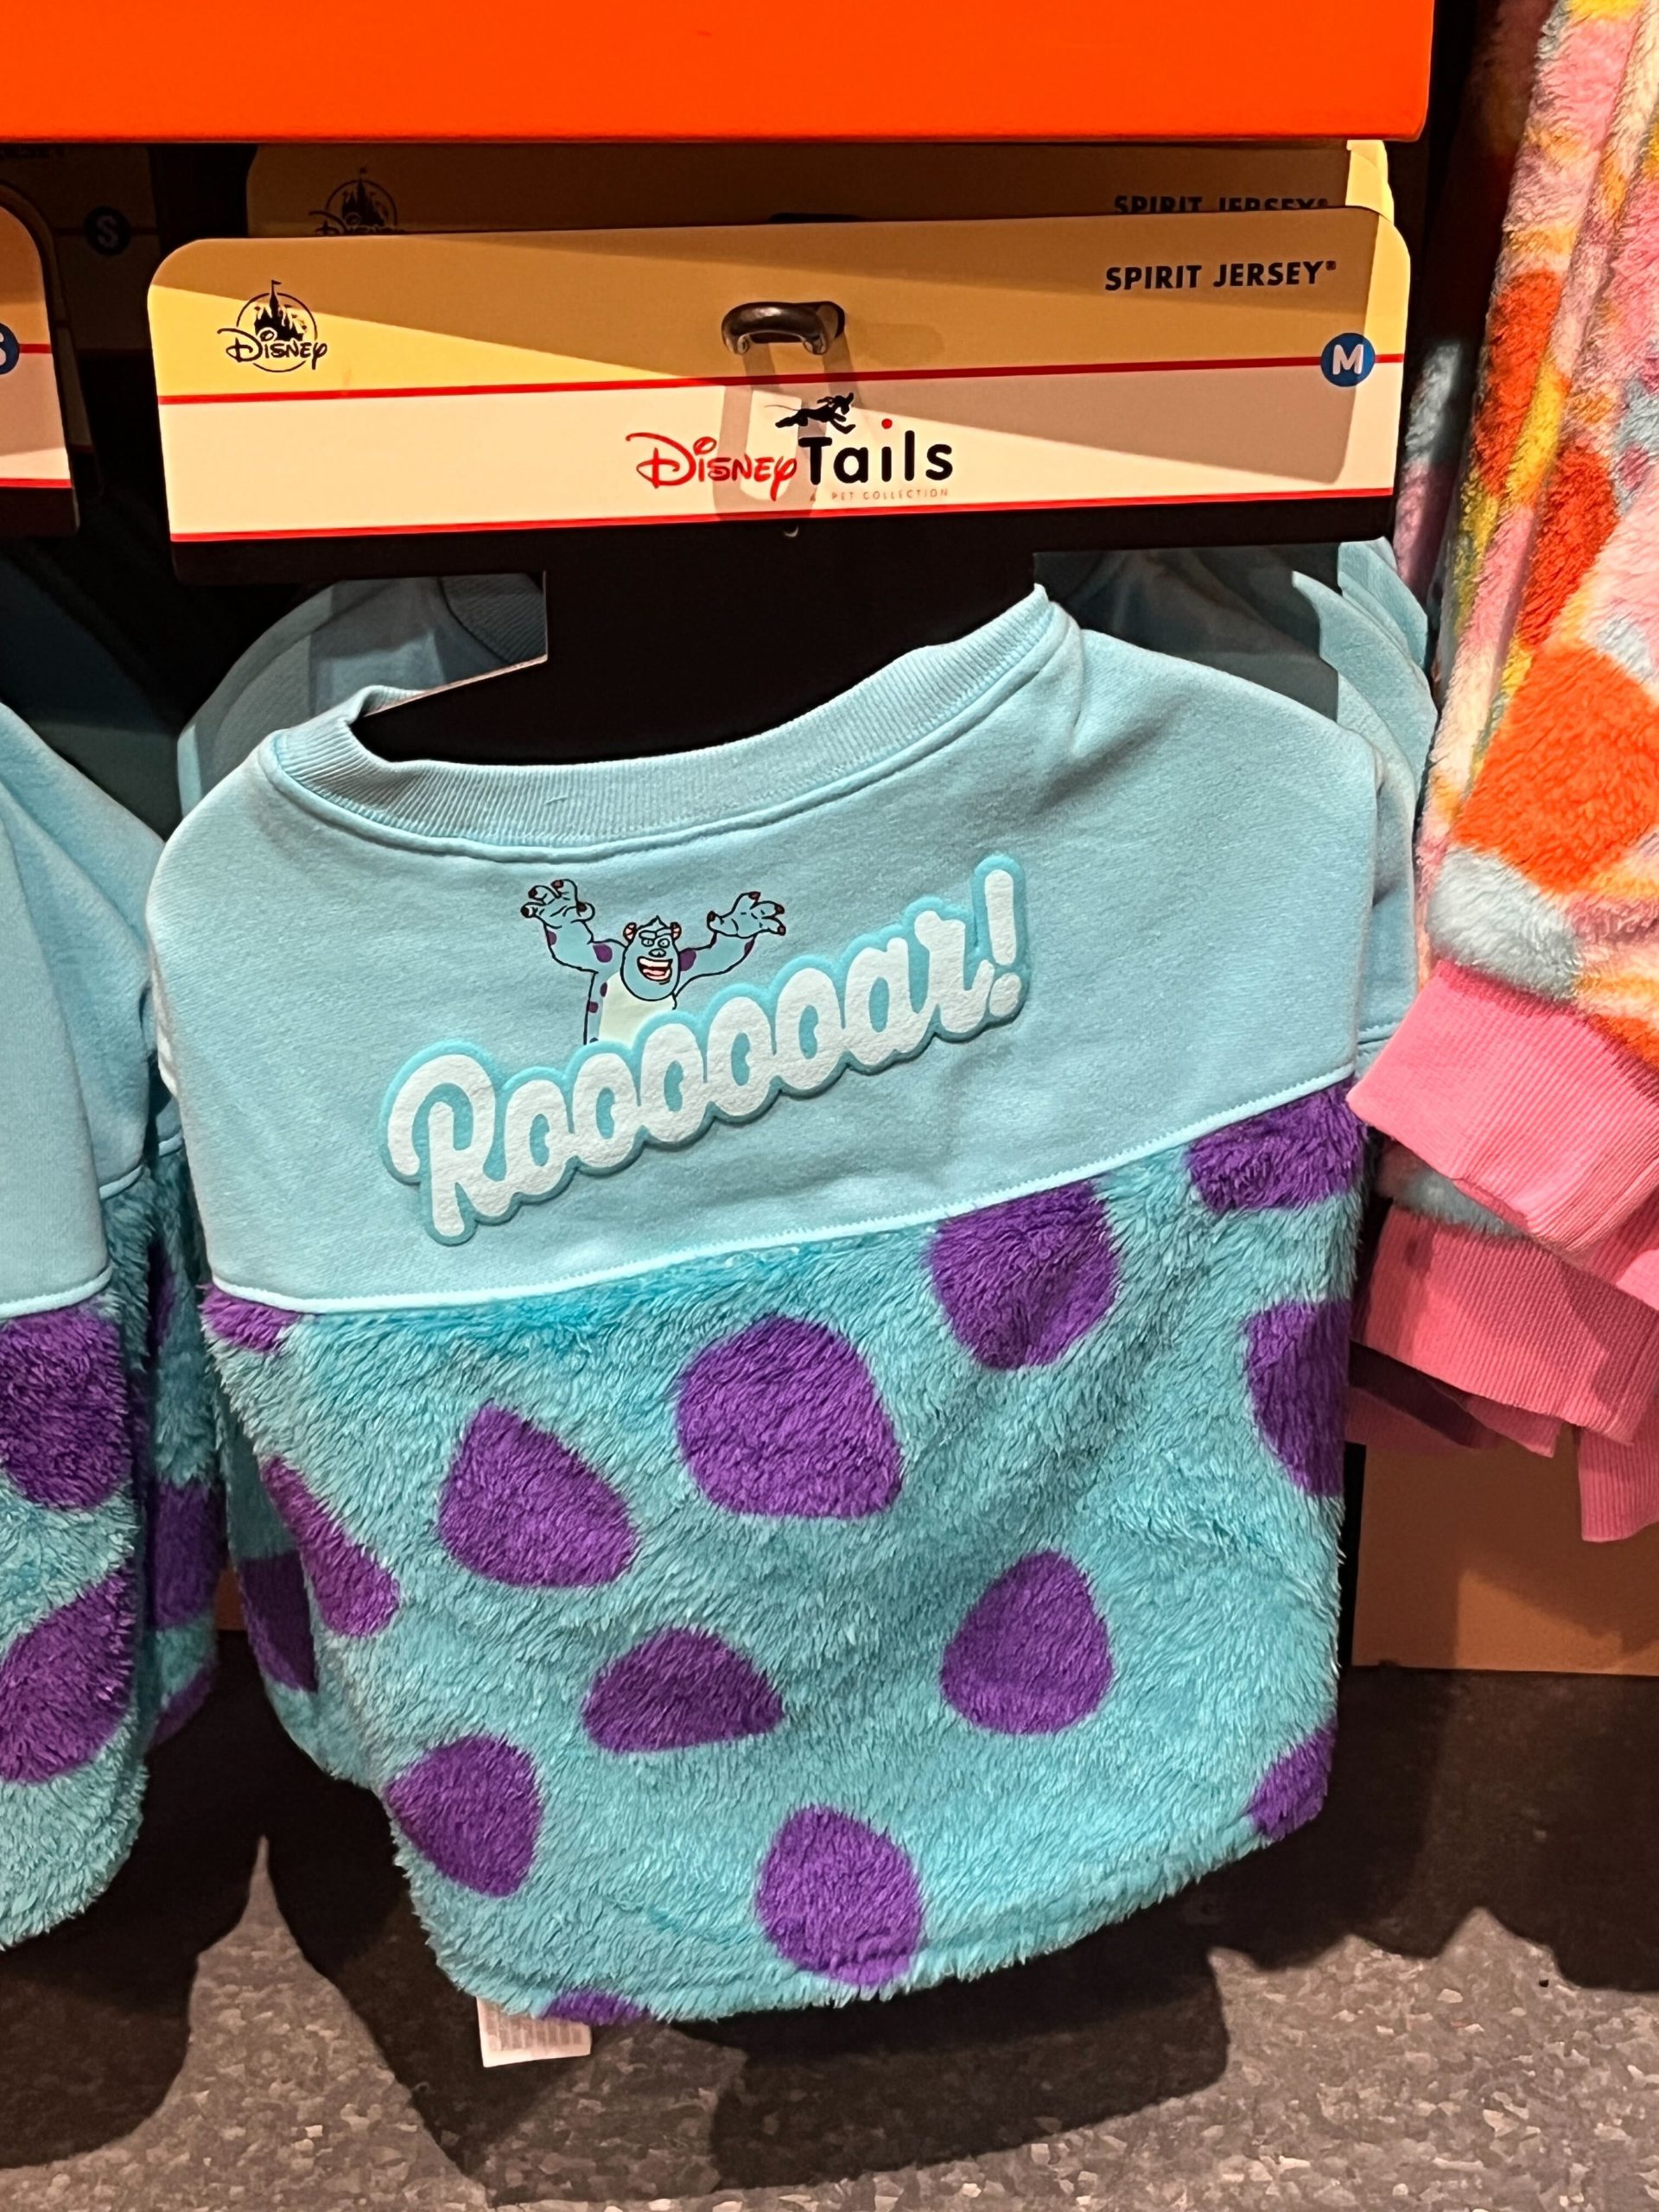 turning red sulley pixar spirit jerseys for pets